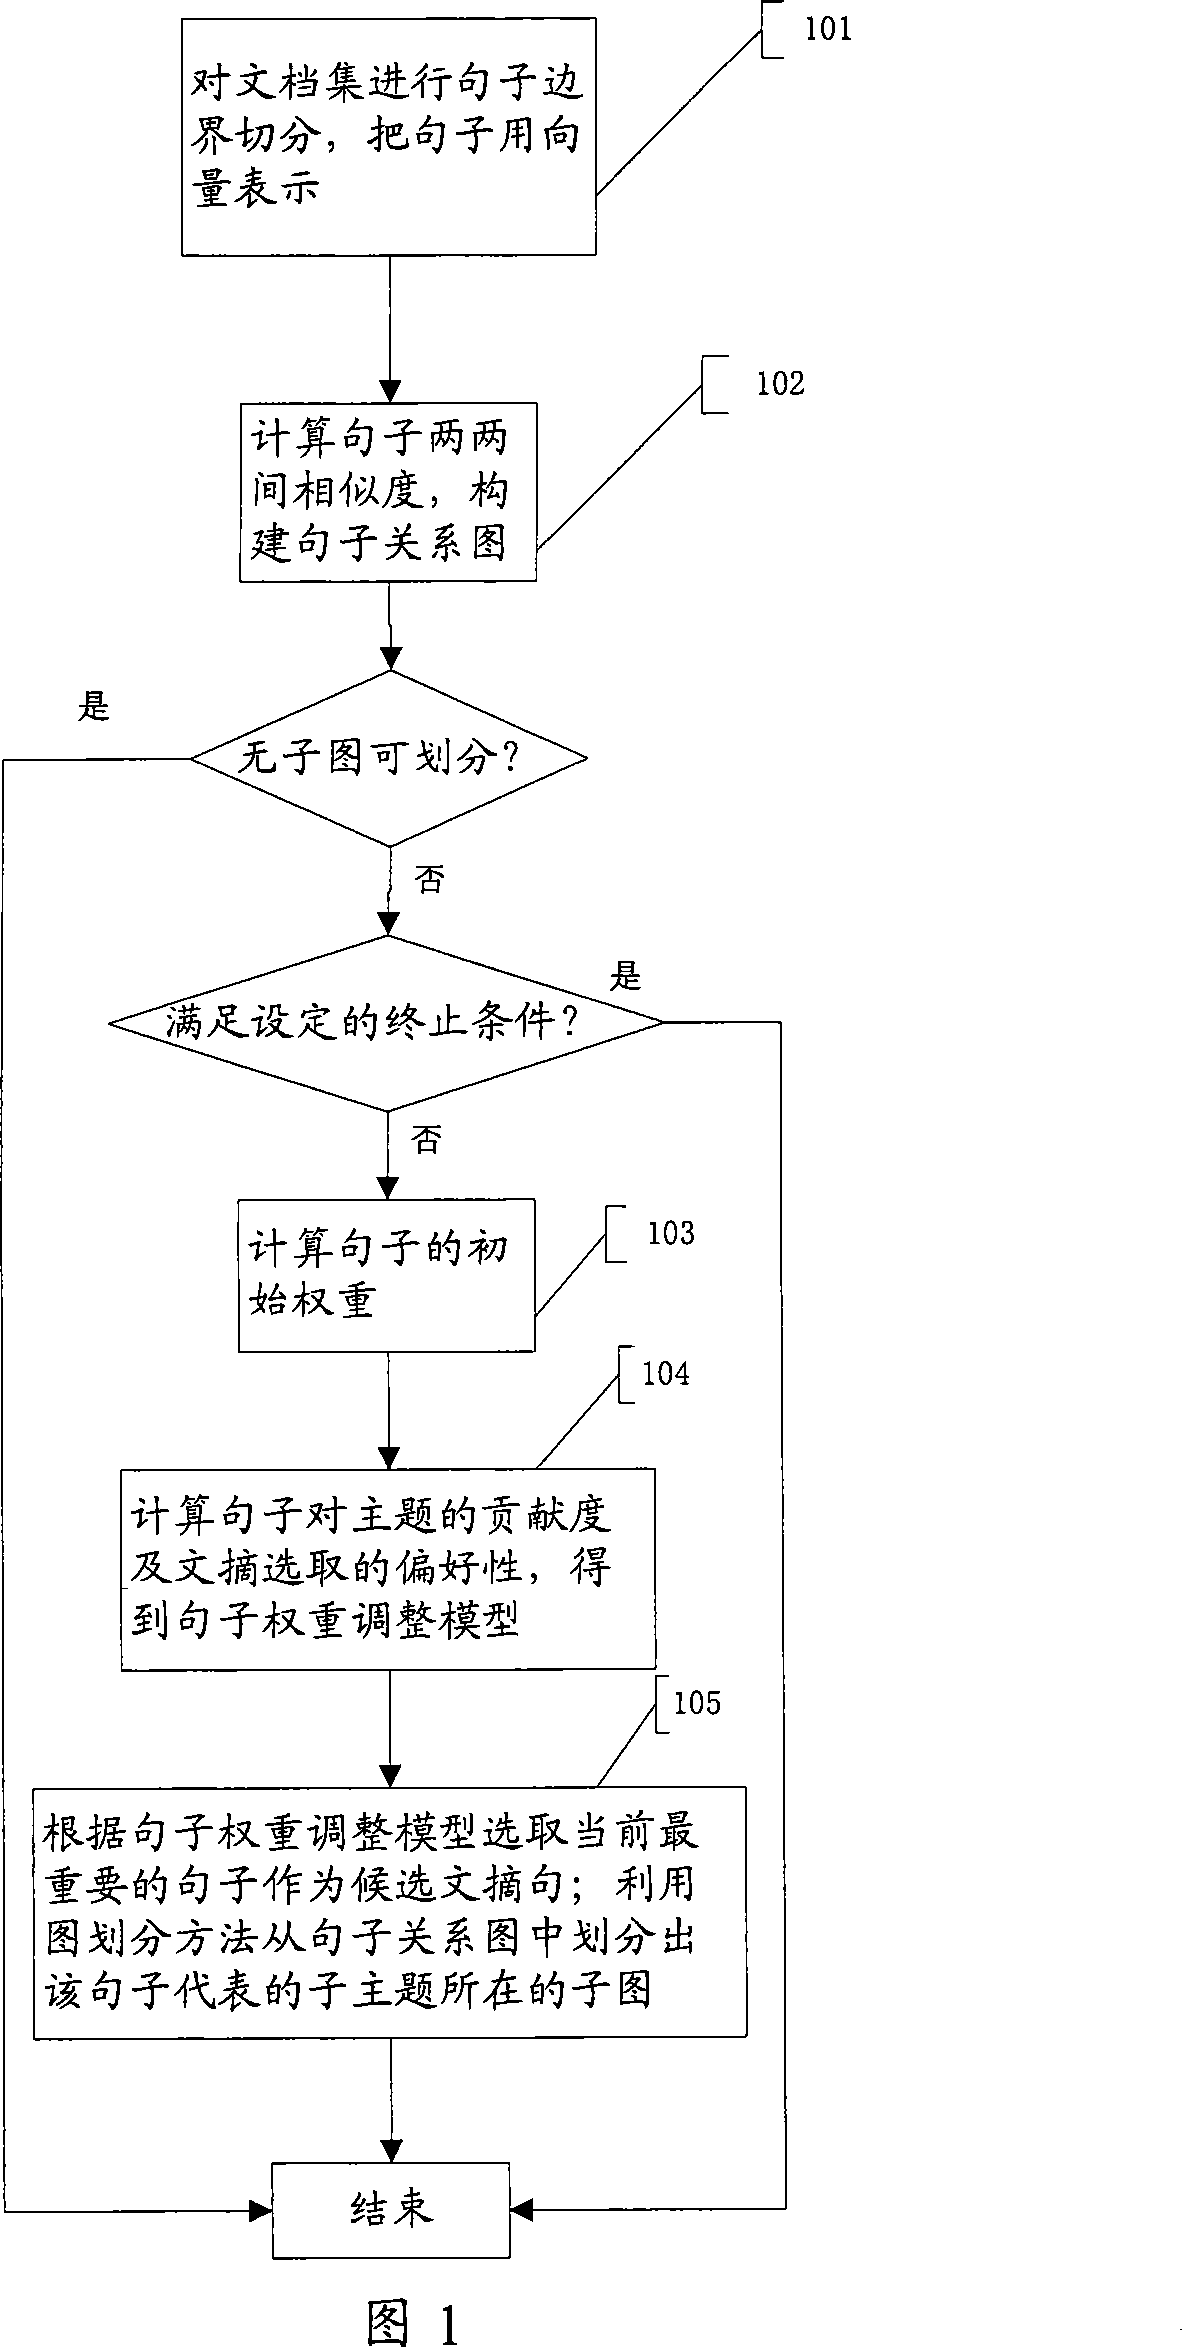 Autoabstract method for multi-document